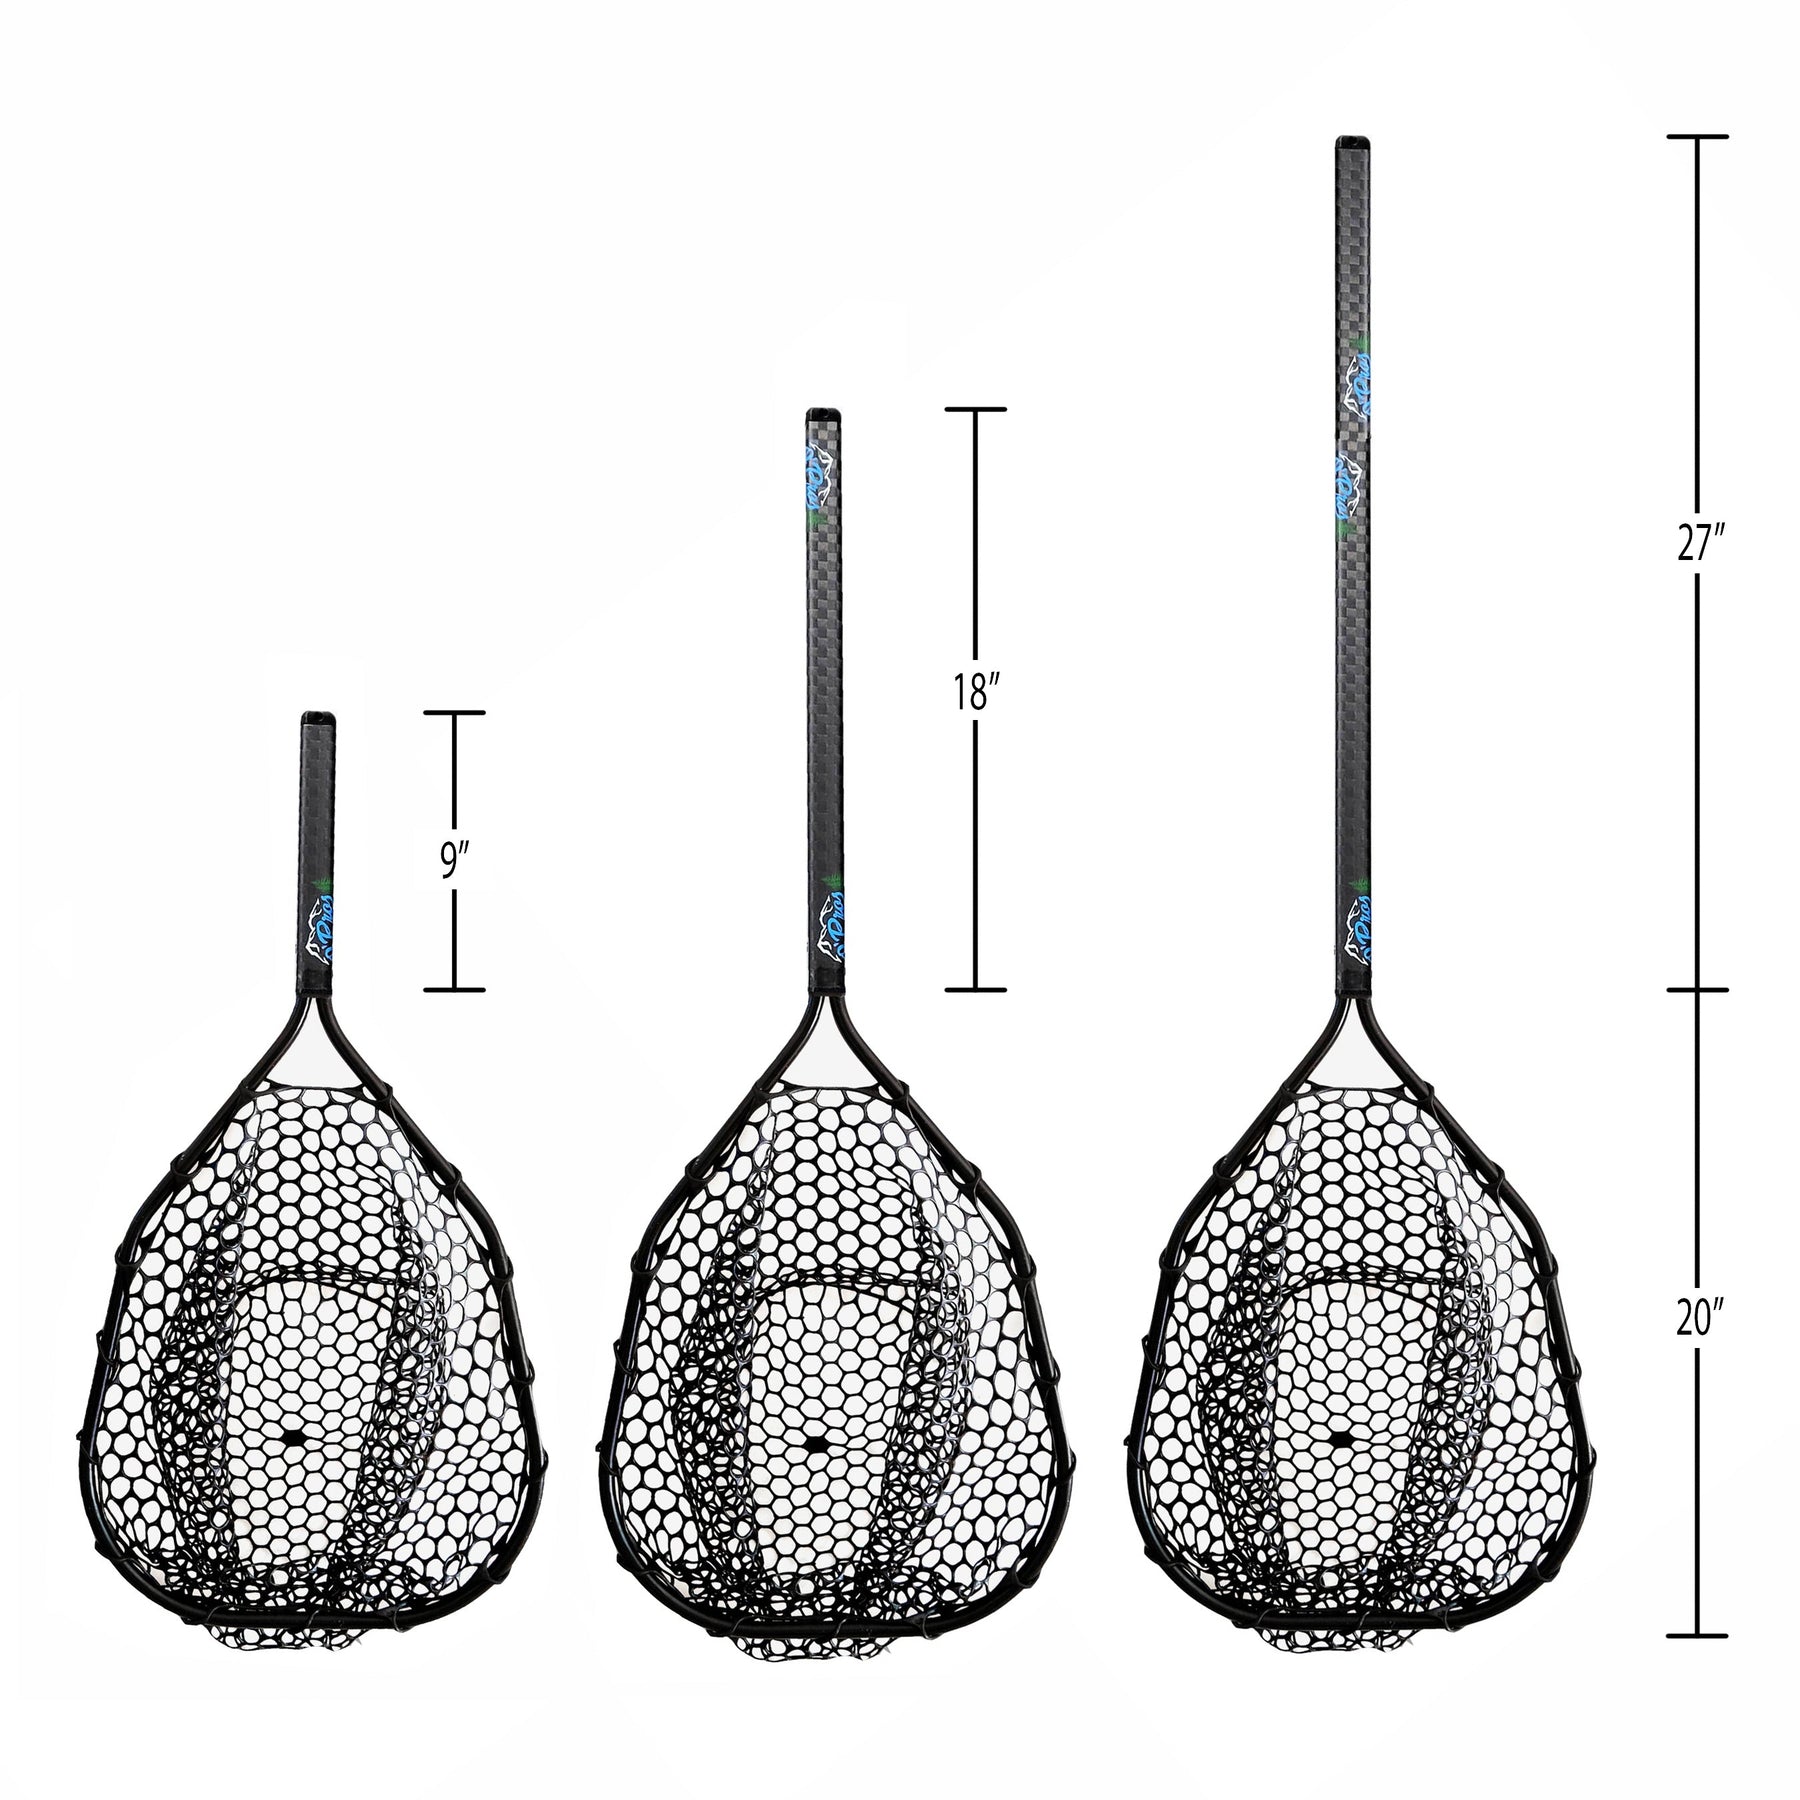 Fishing Net - OEM, Rich Material and Specifications